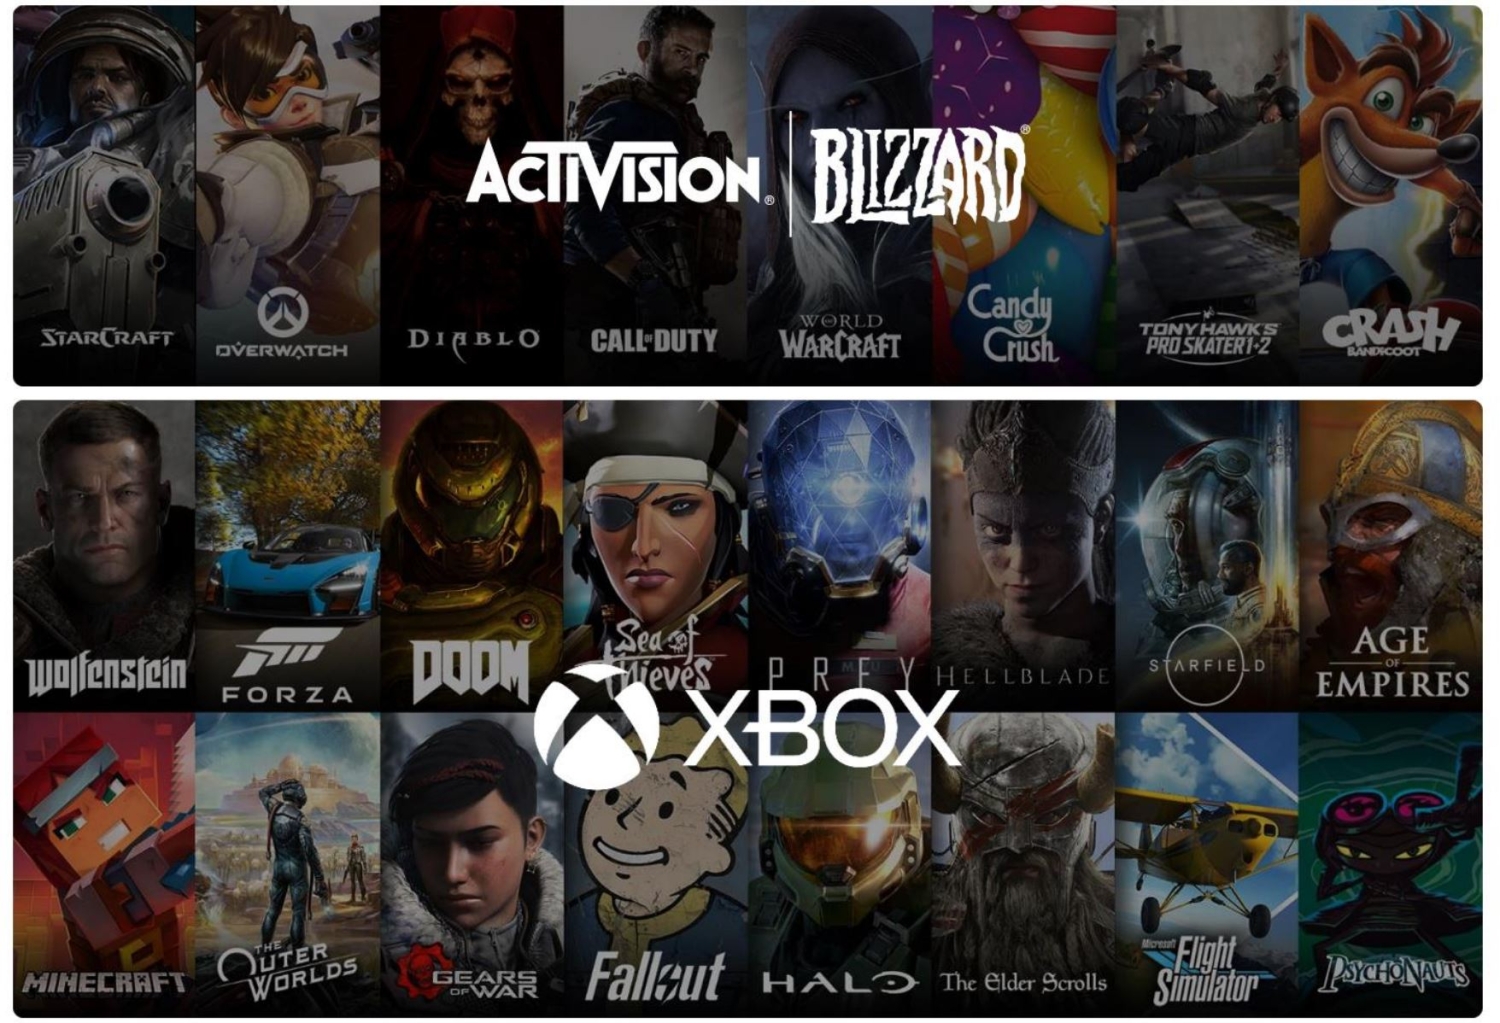 Sony: Adding Activision games to Game Pass would be a 'tipping point